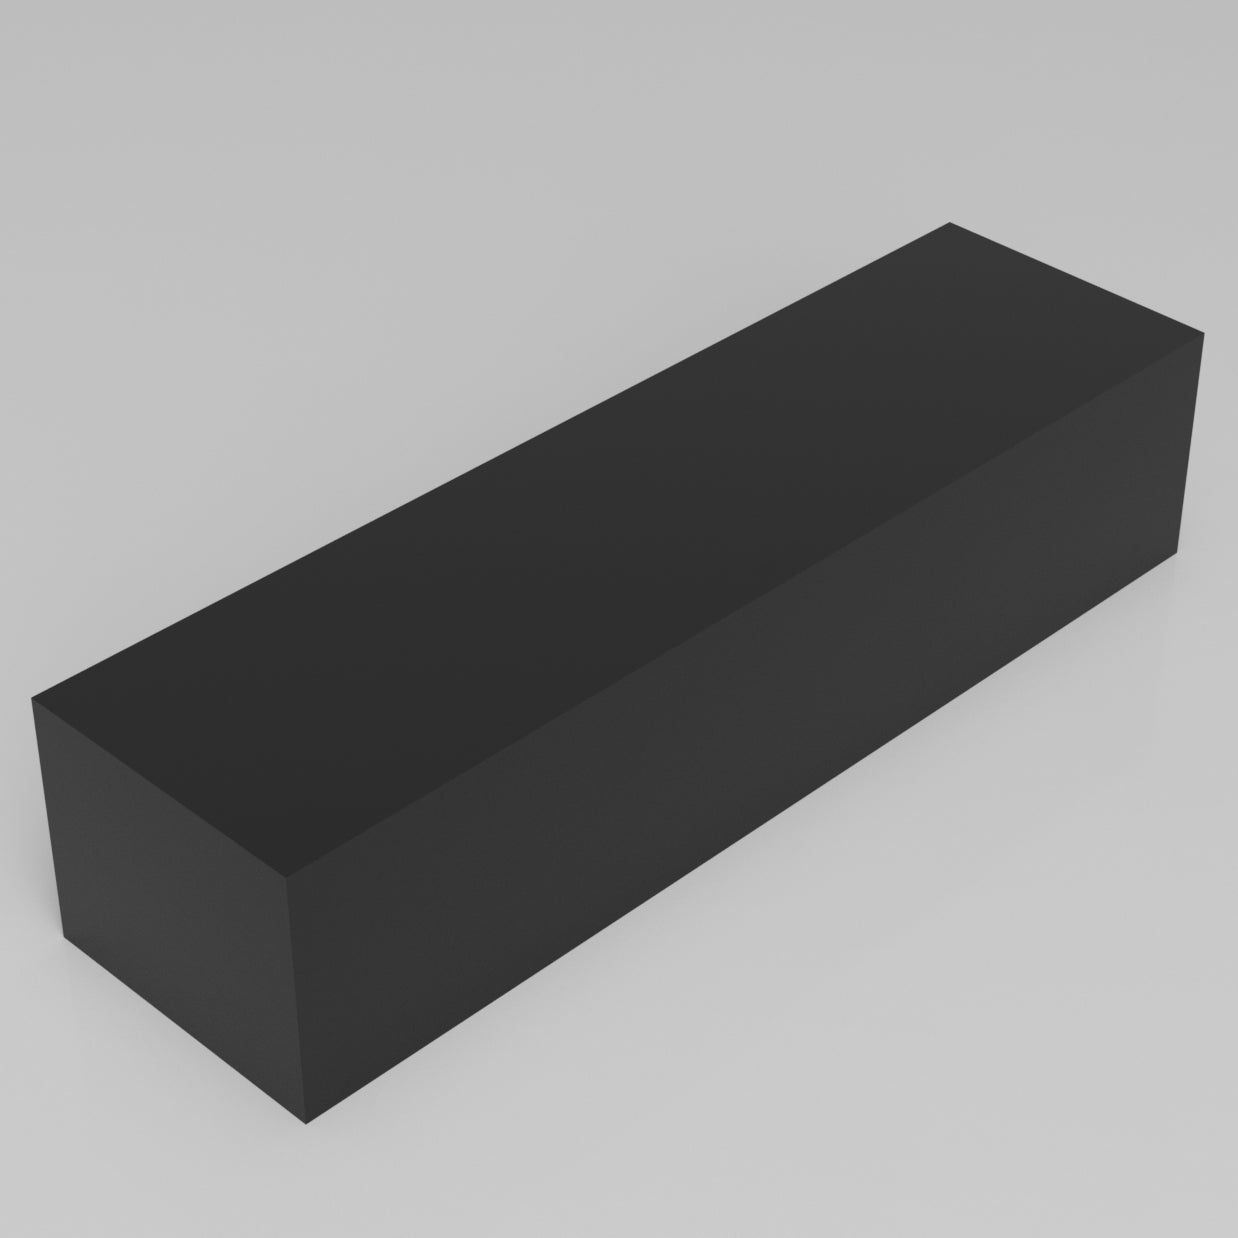 Machinable Wax Rectangular Block Front View 4 Inch by 5 Inch by 18 Inch